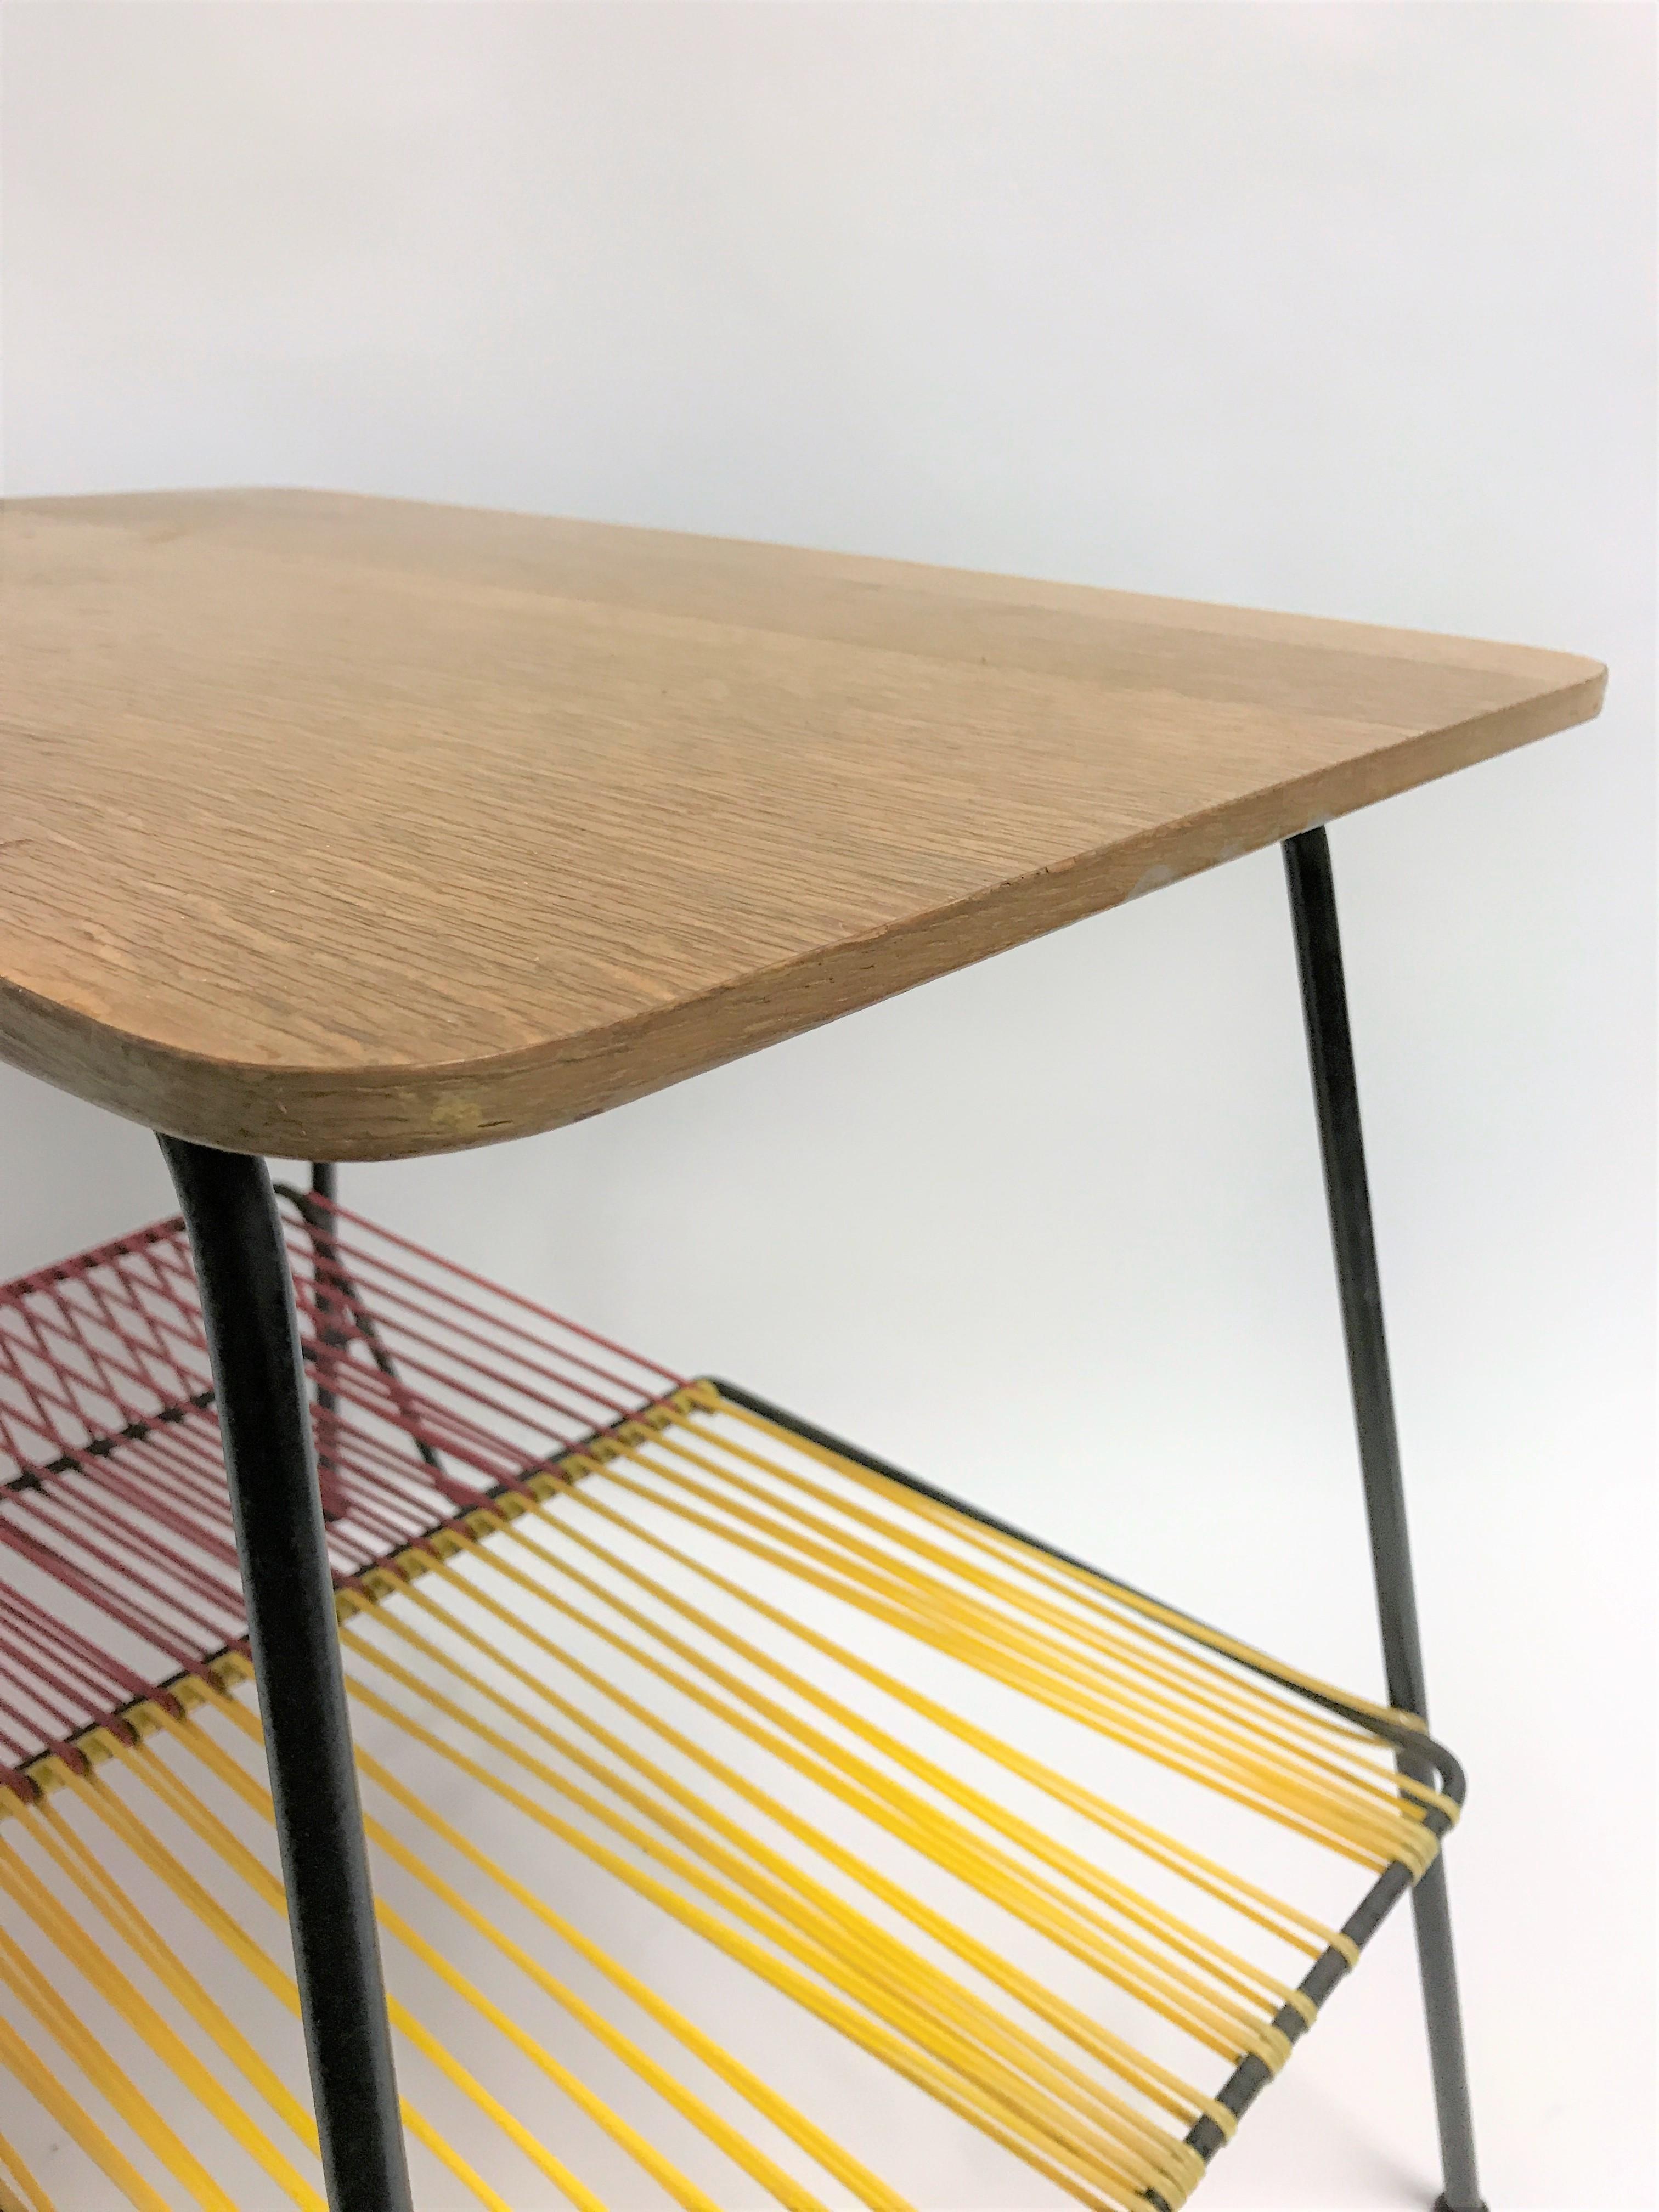 Midcentury plastic cord or 'scoubidou' side table.

Black metal frame with a plastic cord magazine 'shelve' and a wooden top

Very colorful and decorative midcentury piece.

1950s - France

Measures: Height 58cm/22.83